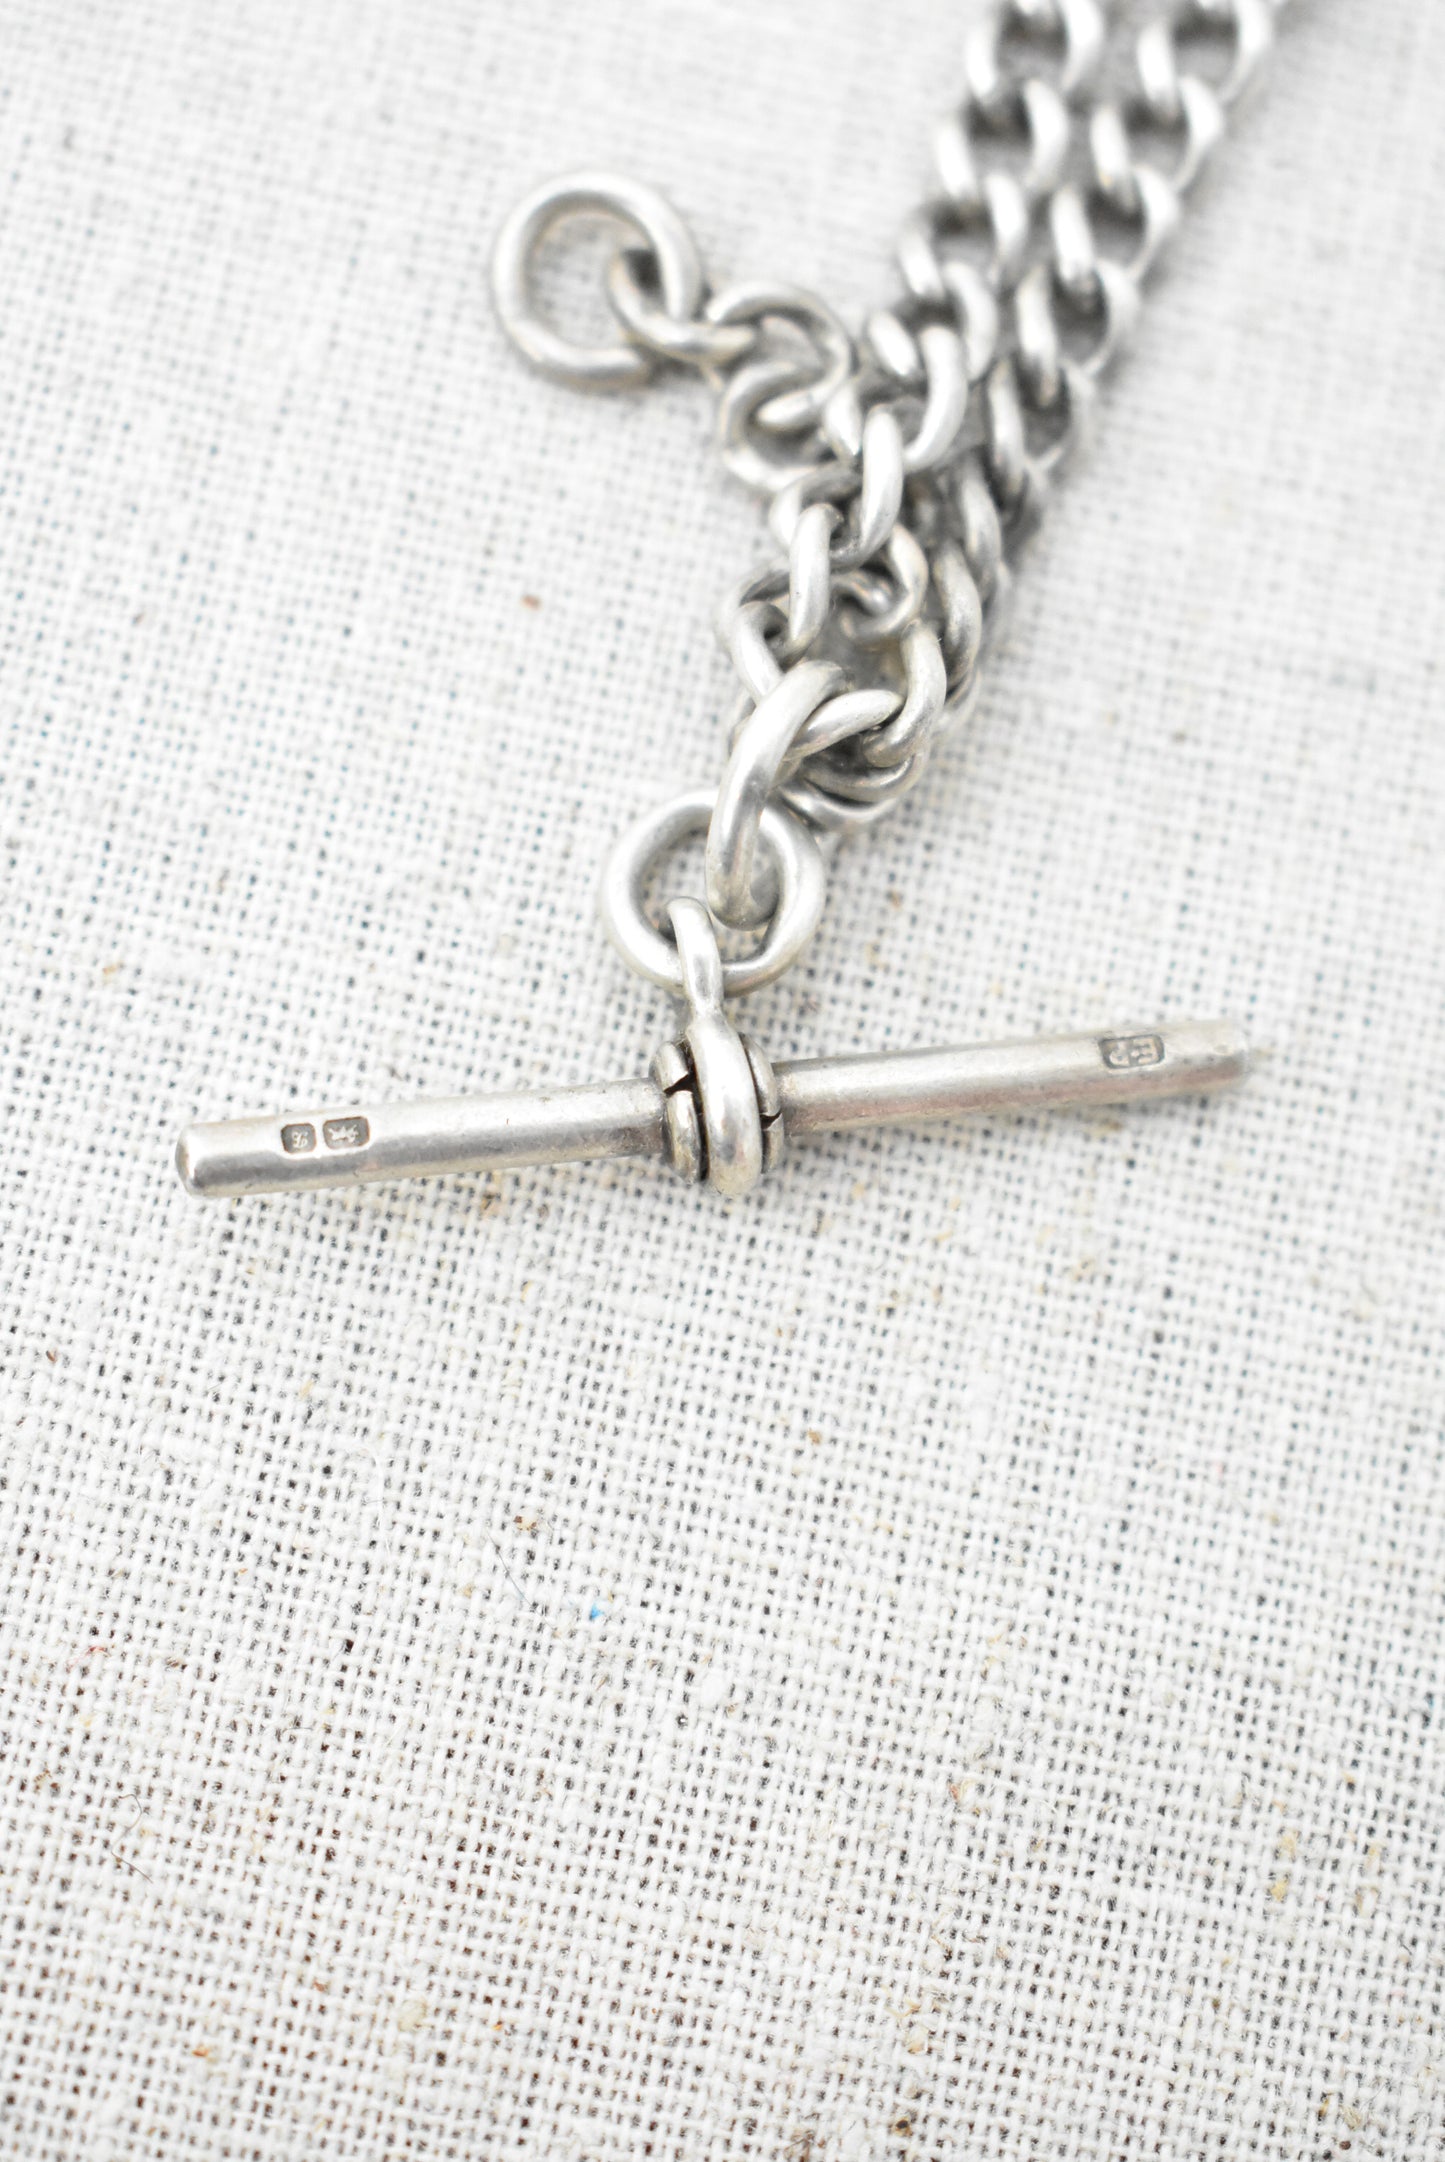 Vintage silver fob, watch chain